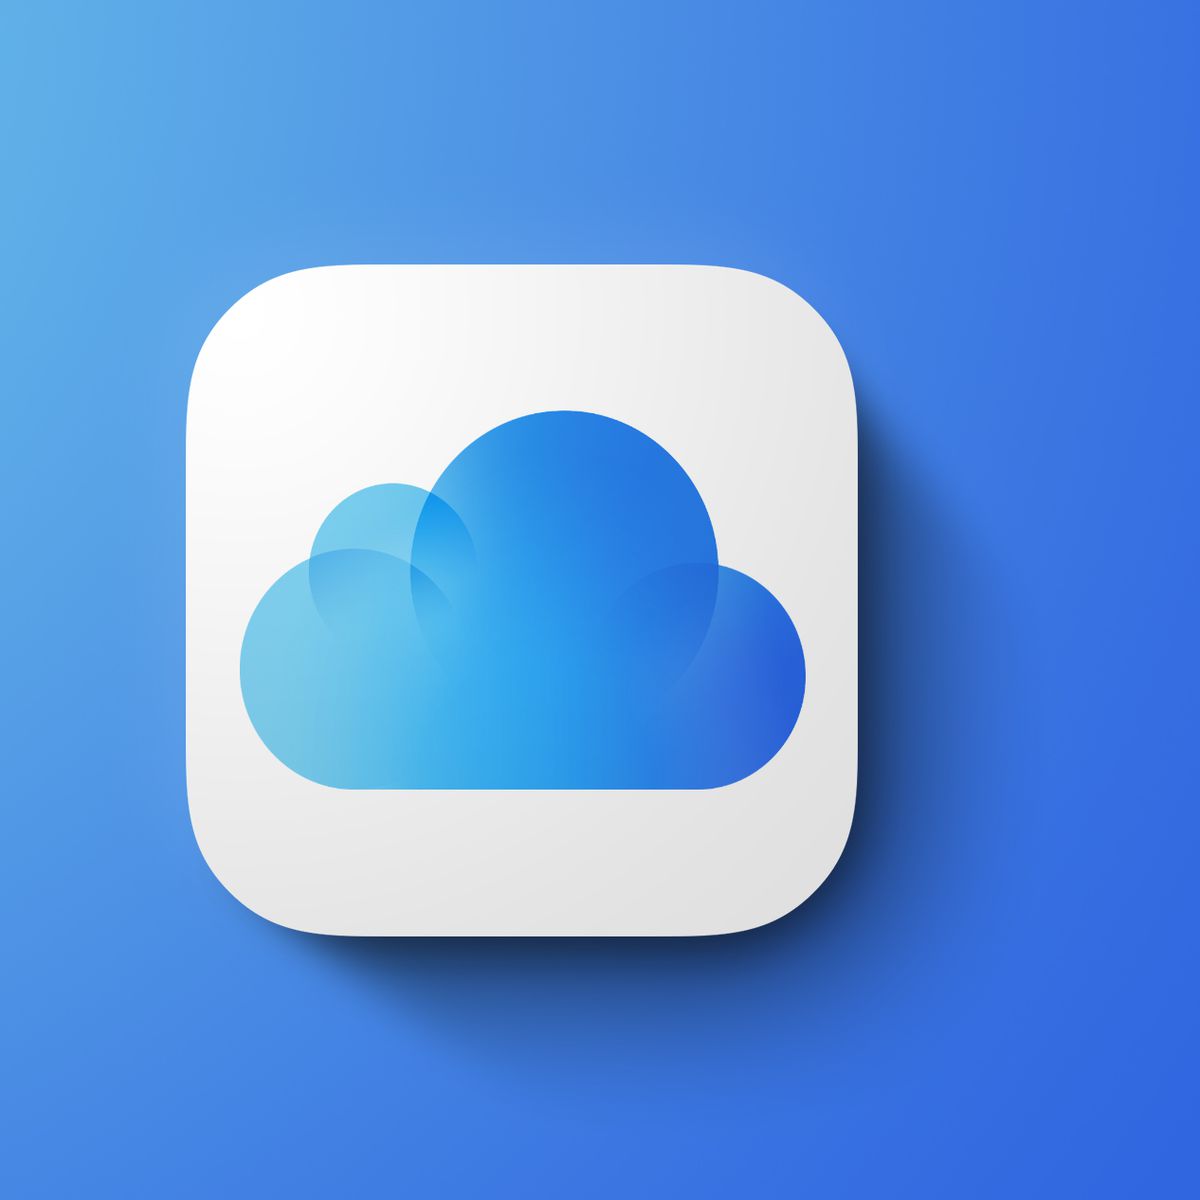 17 fixes for iCloud Mail not working on iPhone, iPad, Mac, Web